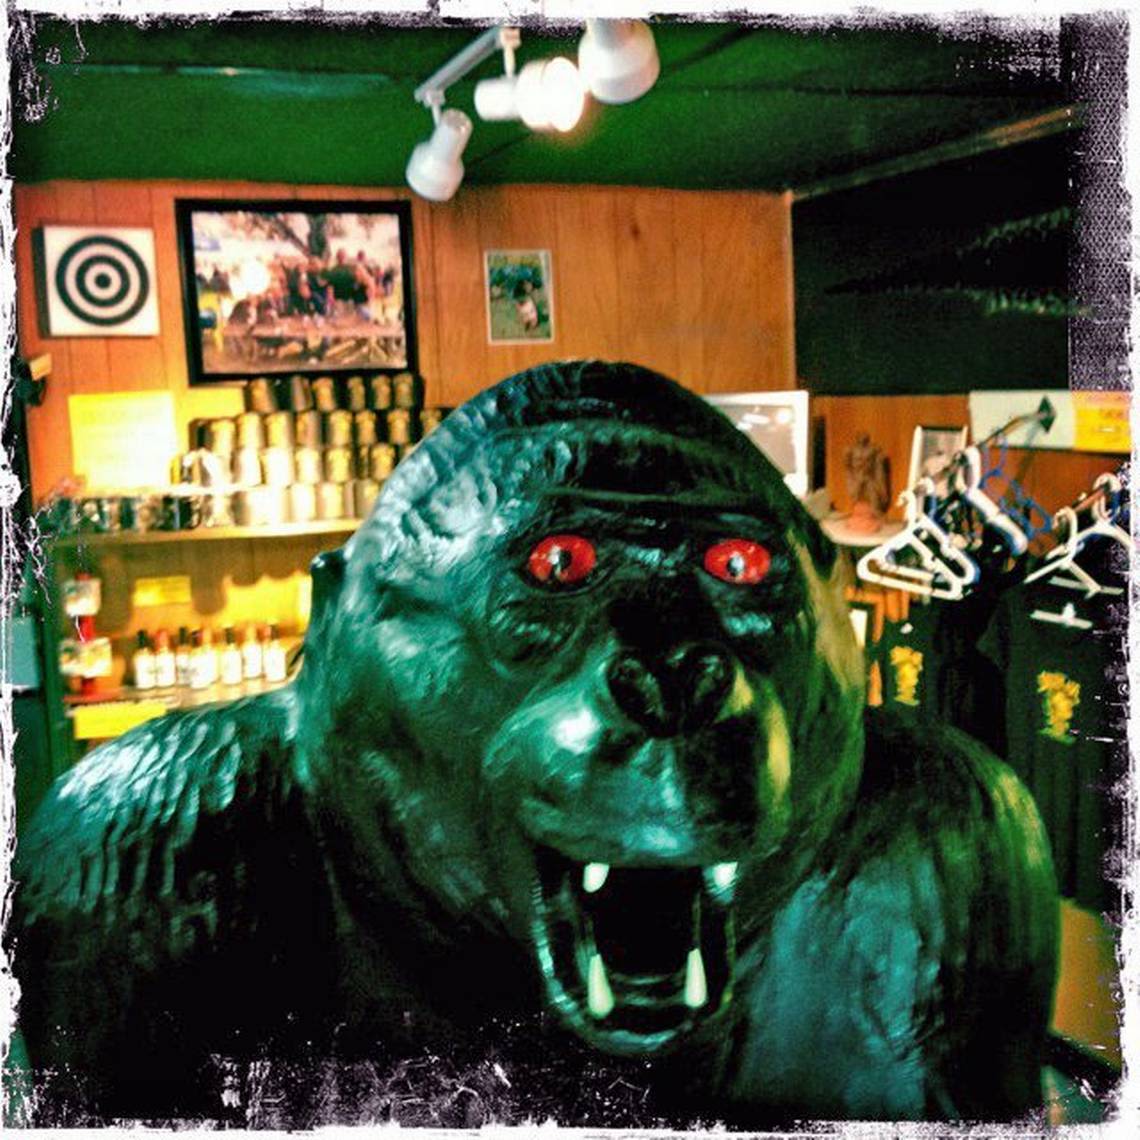 Have you seen the Everglades Skunk Ape? It’s just been named a top attraction in the US